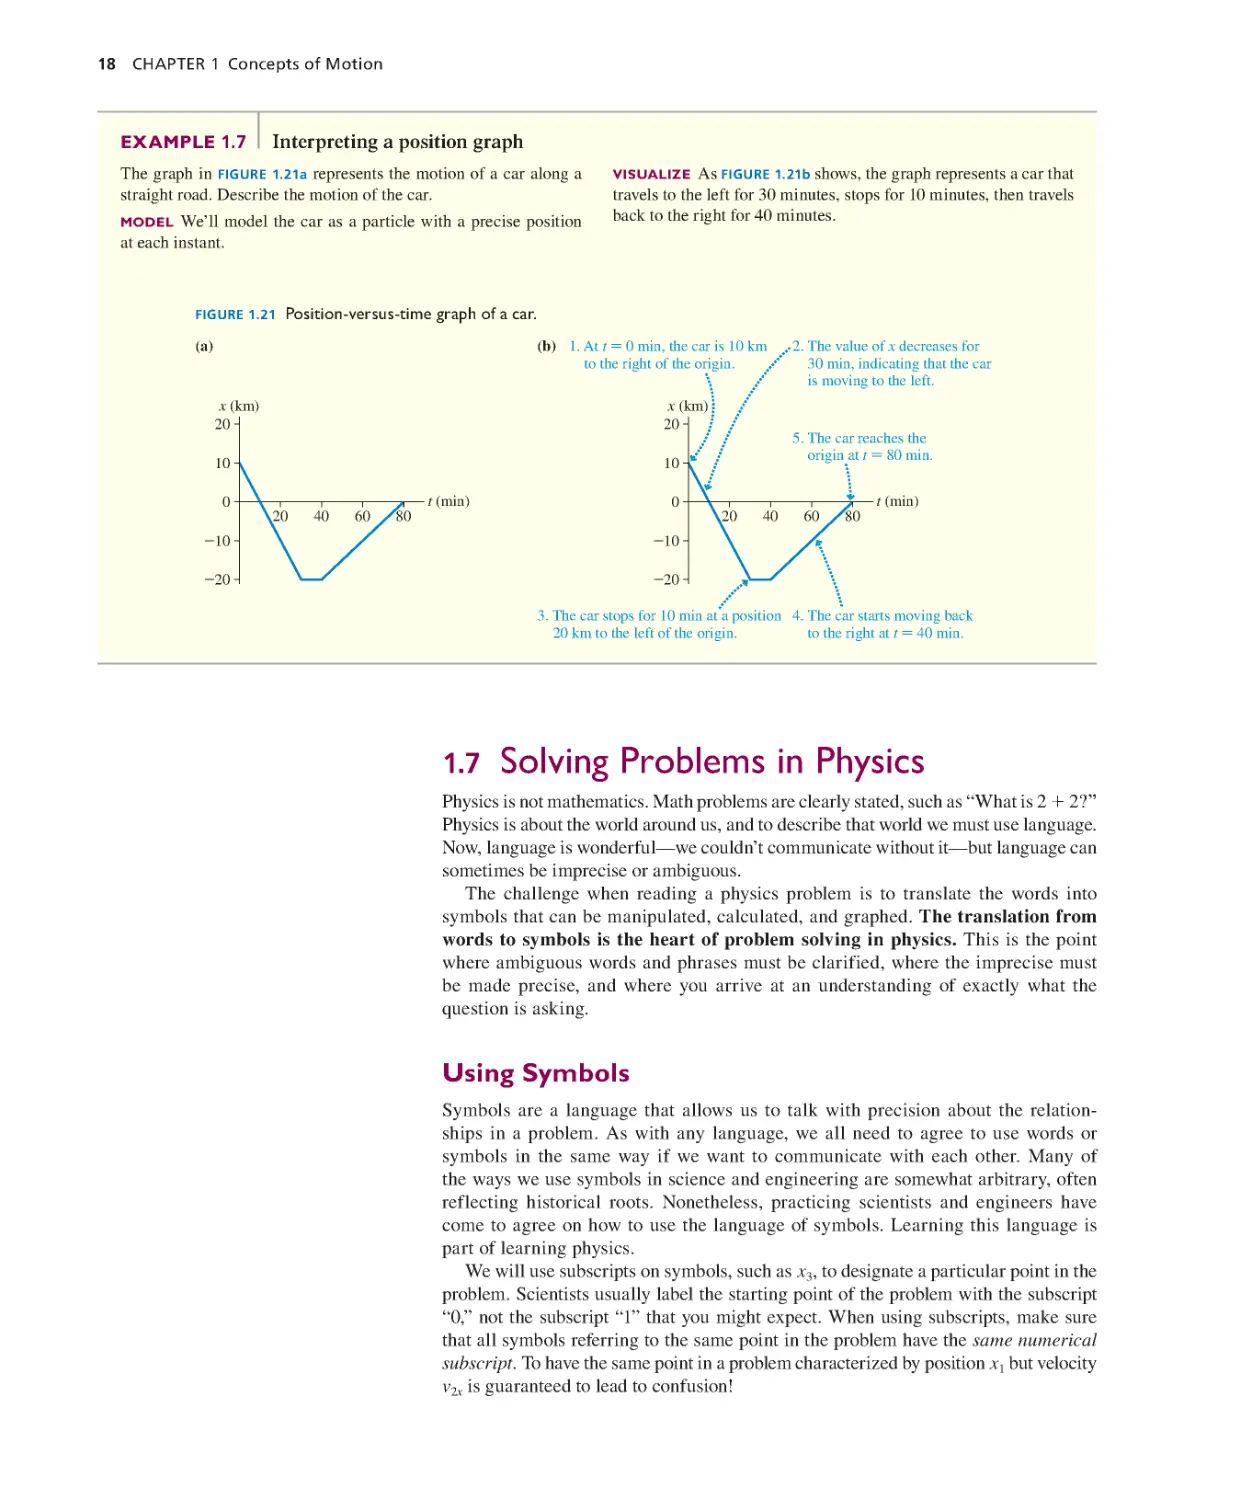 1.7. Solving Problems in Physics